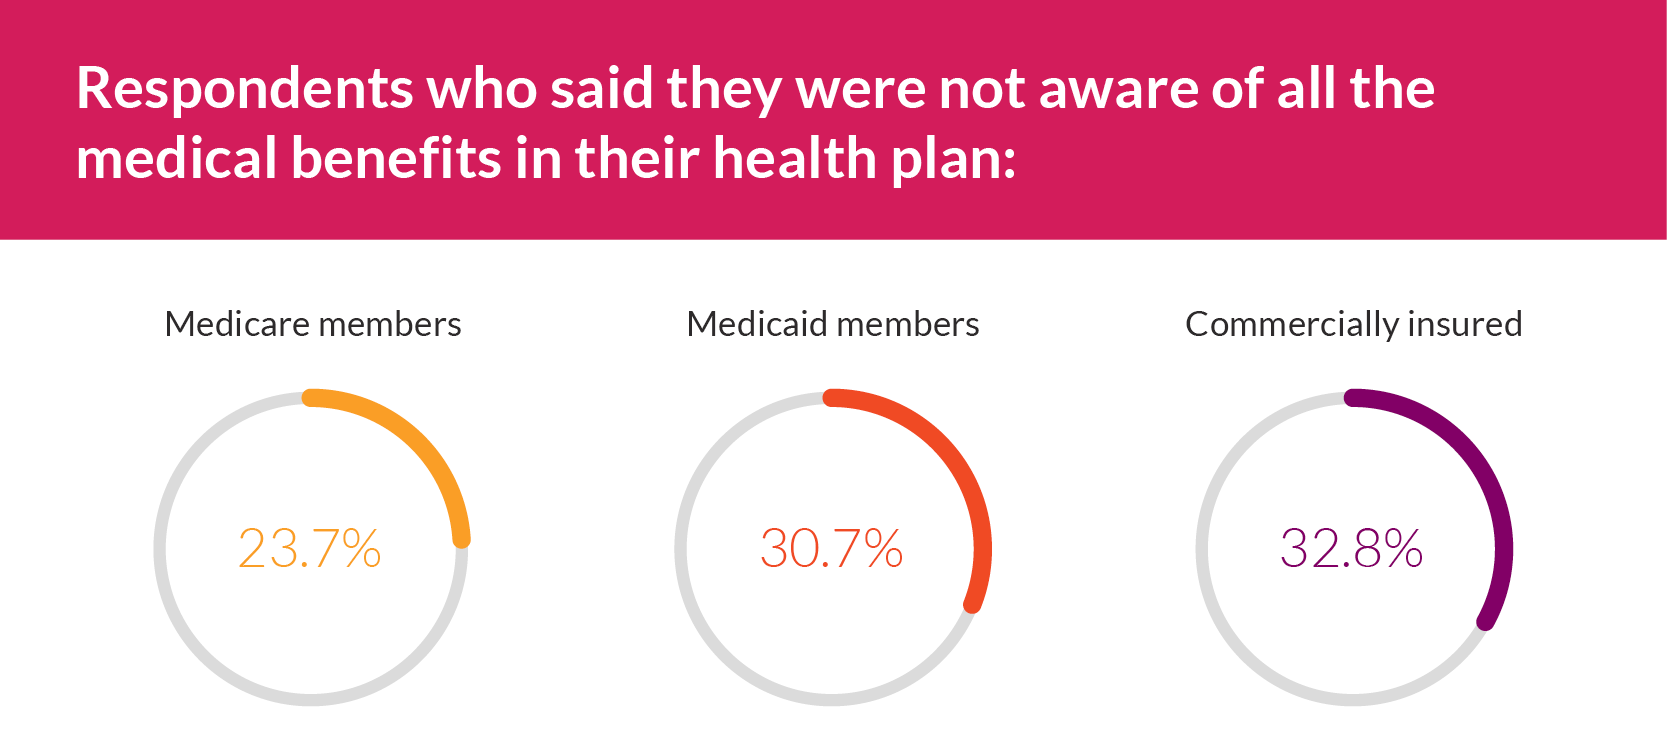 respondents who said they feel their insurer cares about their health and wellbeing medicare members 79% medicaid members 74% commercially insured 60%